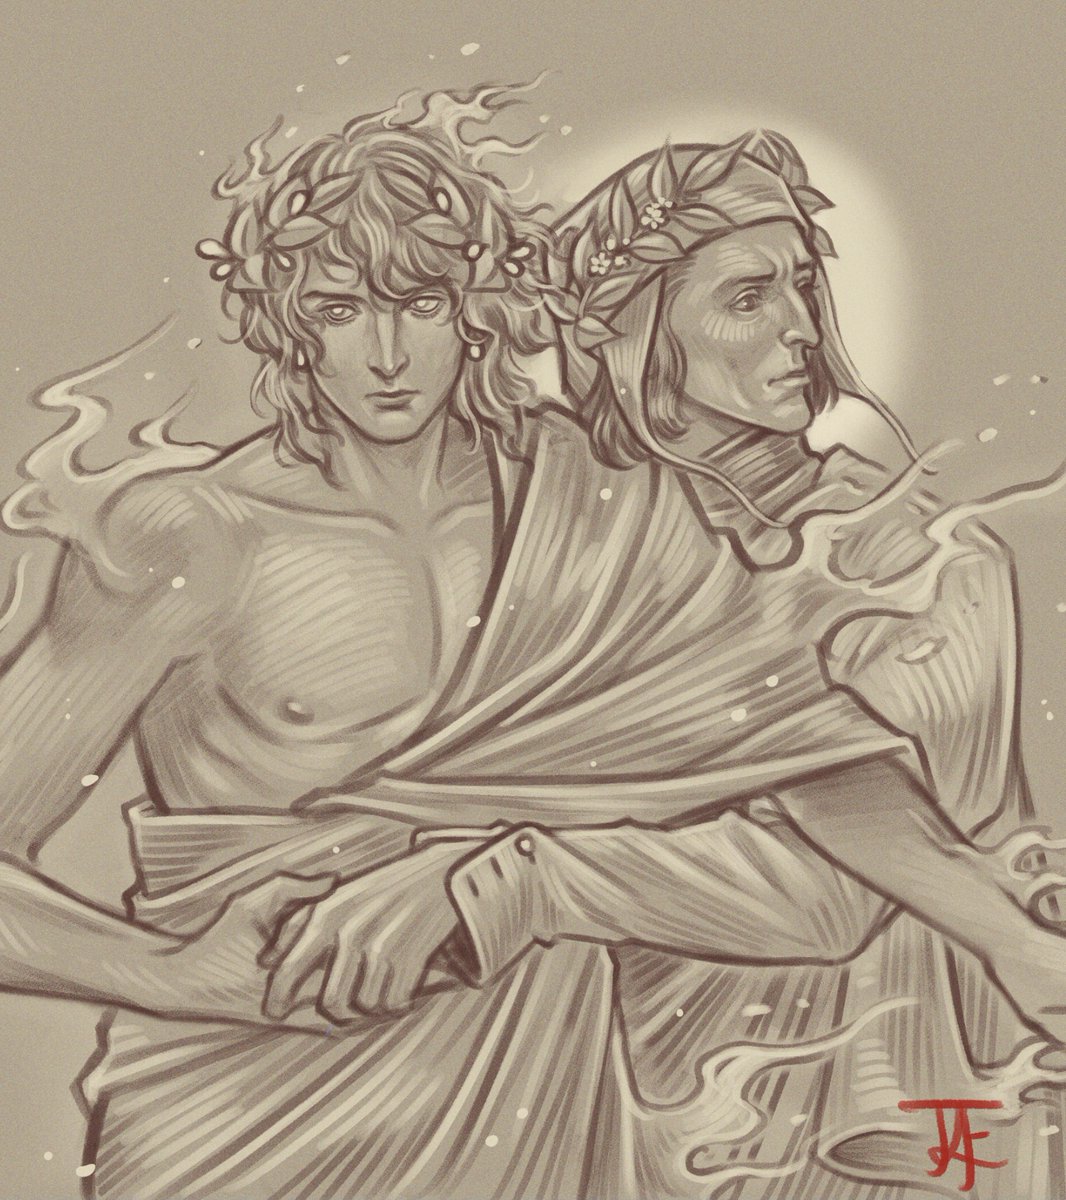 💧VIRGIL & DANTE (sketch)🩸

Thank you everyone who watched the stream last night! I'll be continue working on this in the upcoming week so I can add some demons and other creatures from Inferno.

You can watch the stream's VOD below⬇️
#DantesInferno #TheDivineComedy